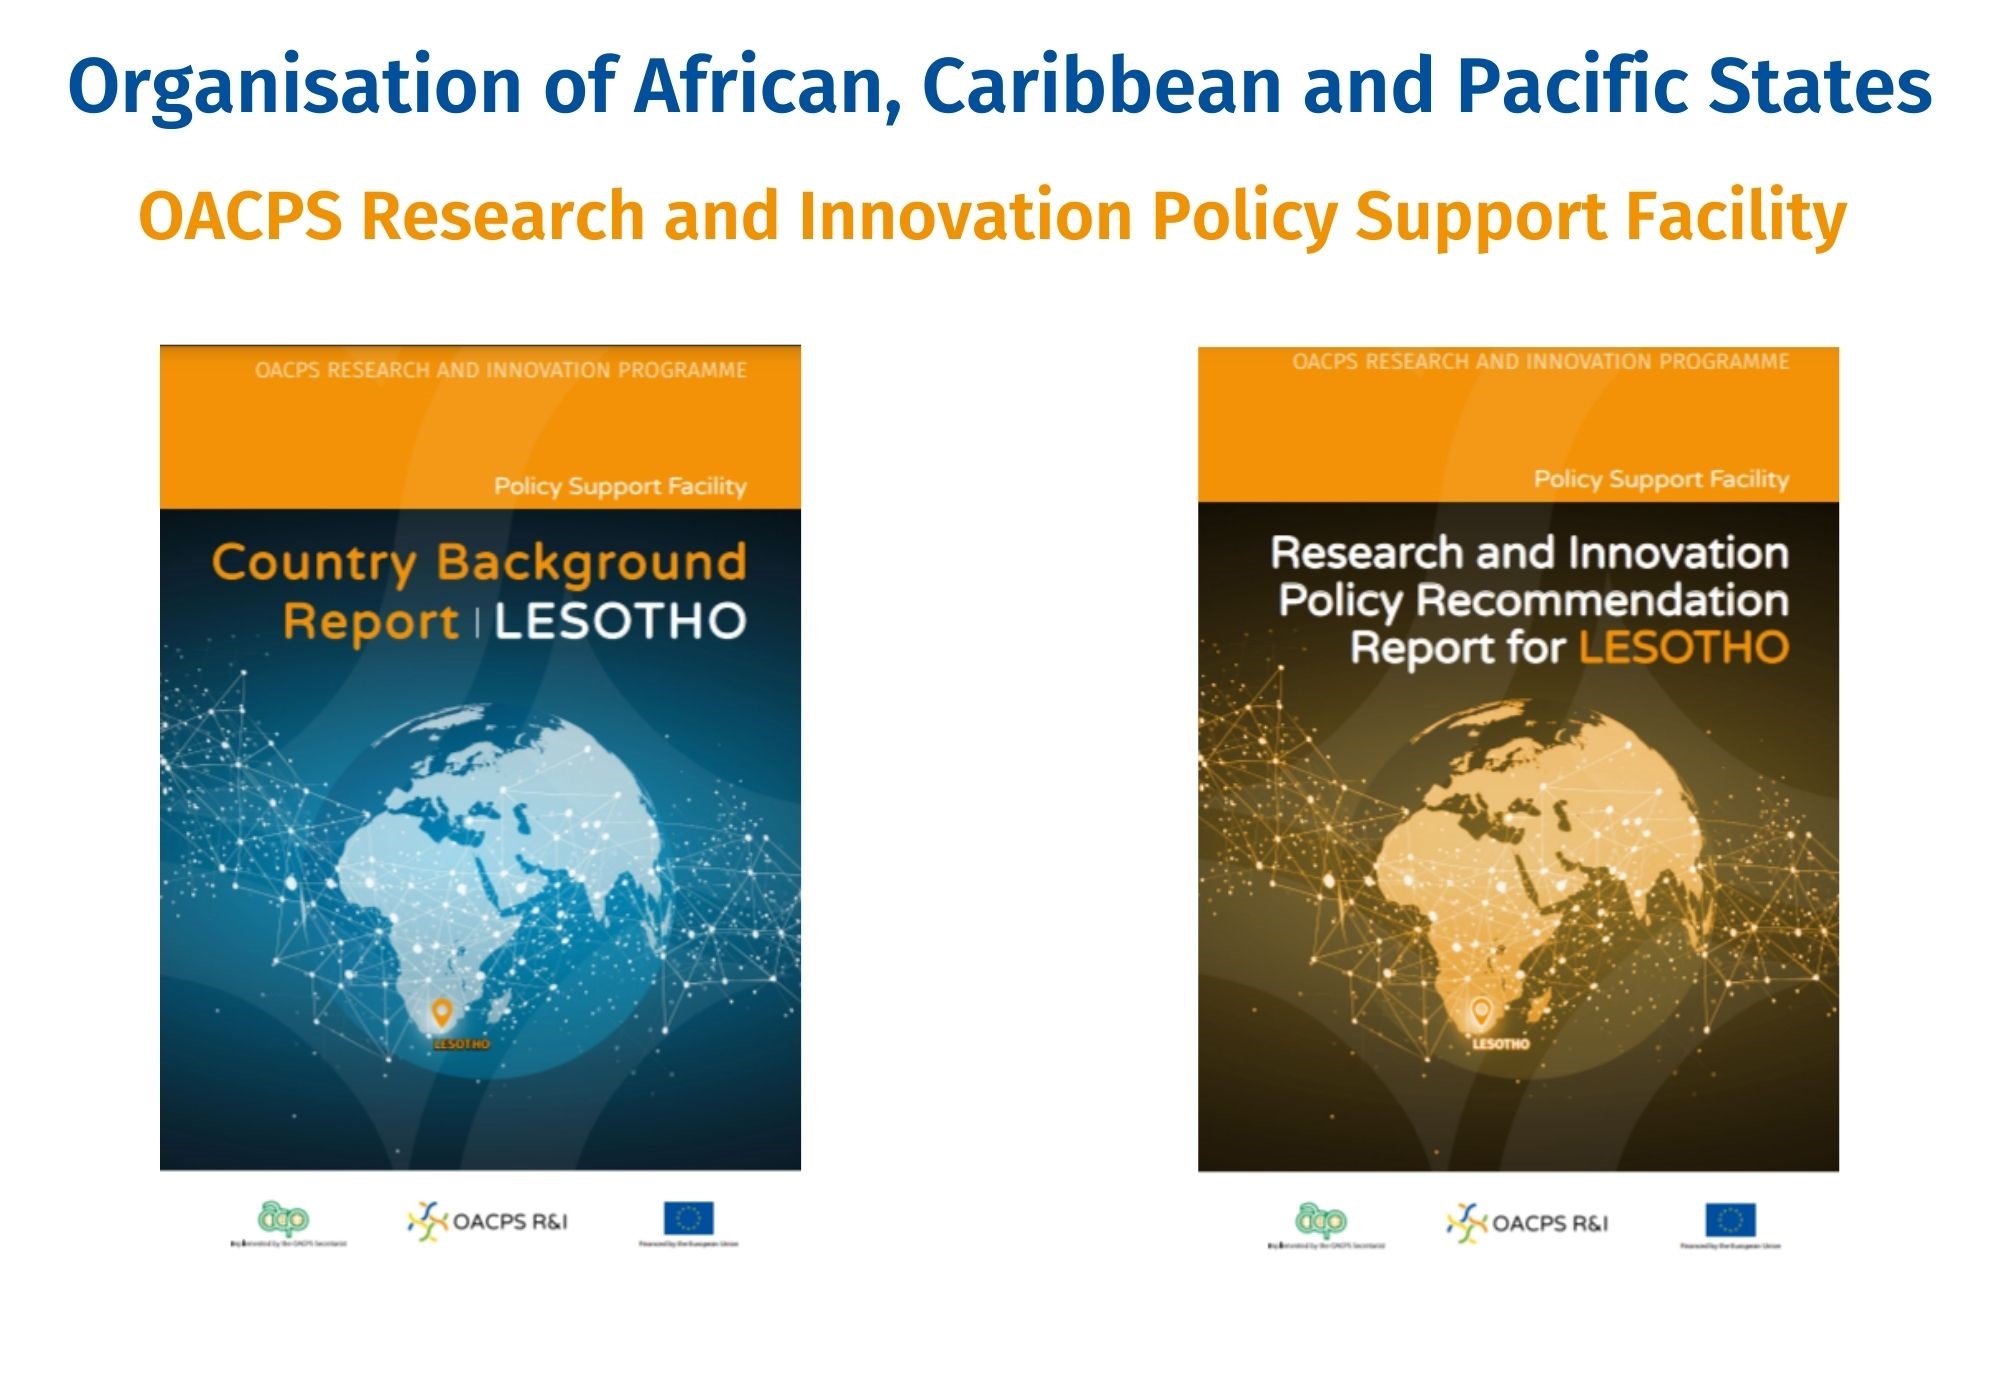 TOWARDS A NEW RESEARCH AND INNOVATION POLICY IN LESOTHO